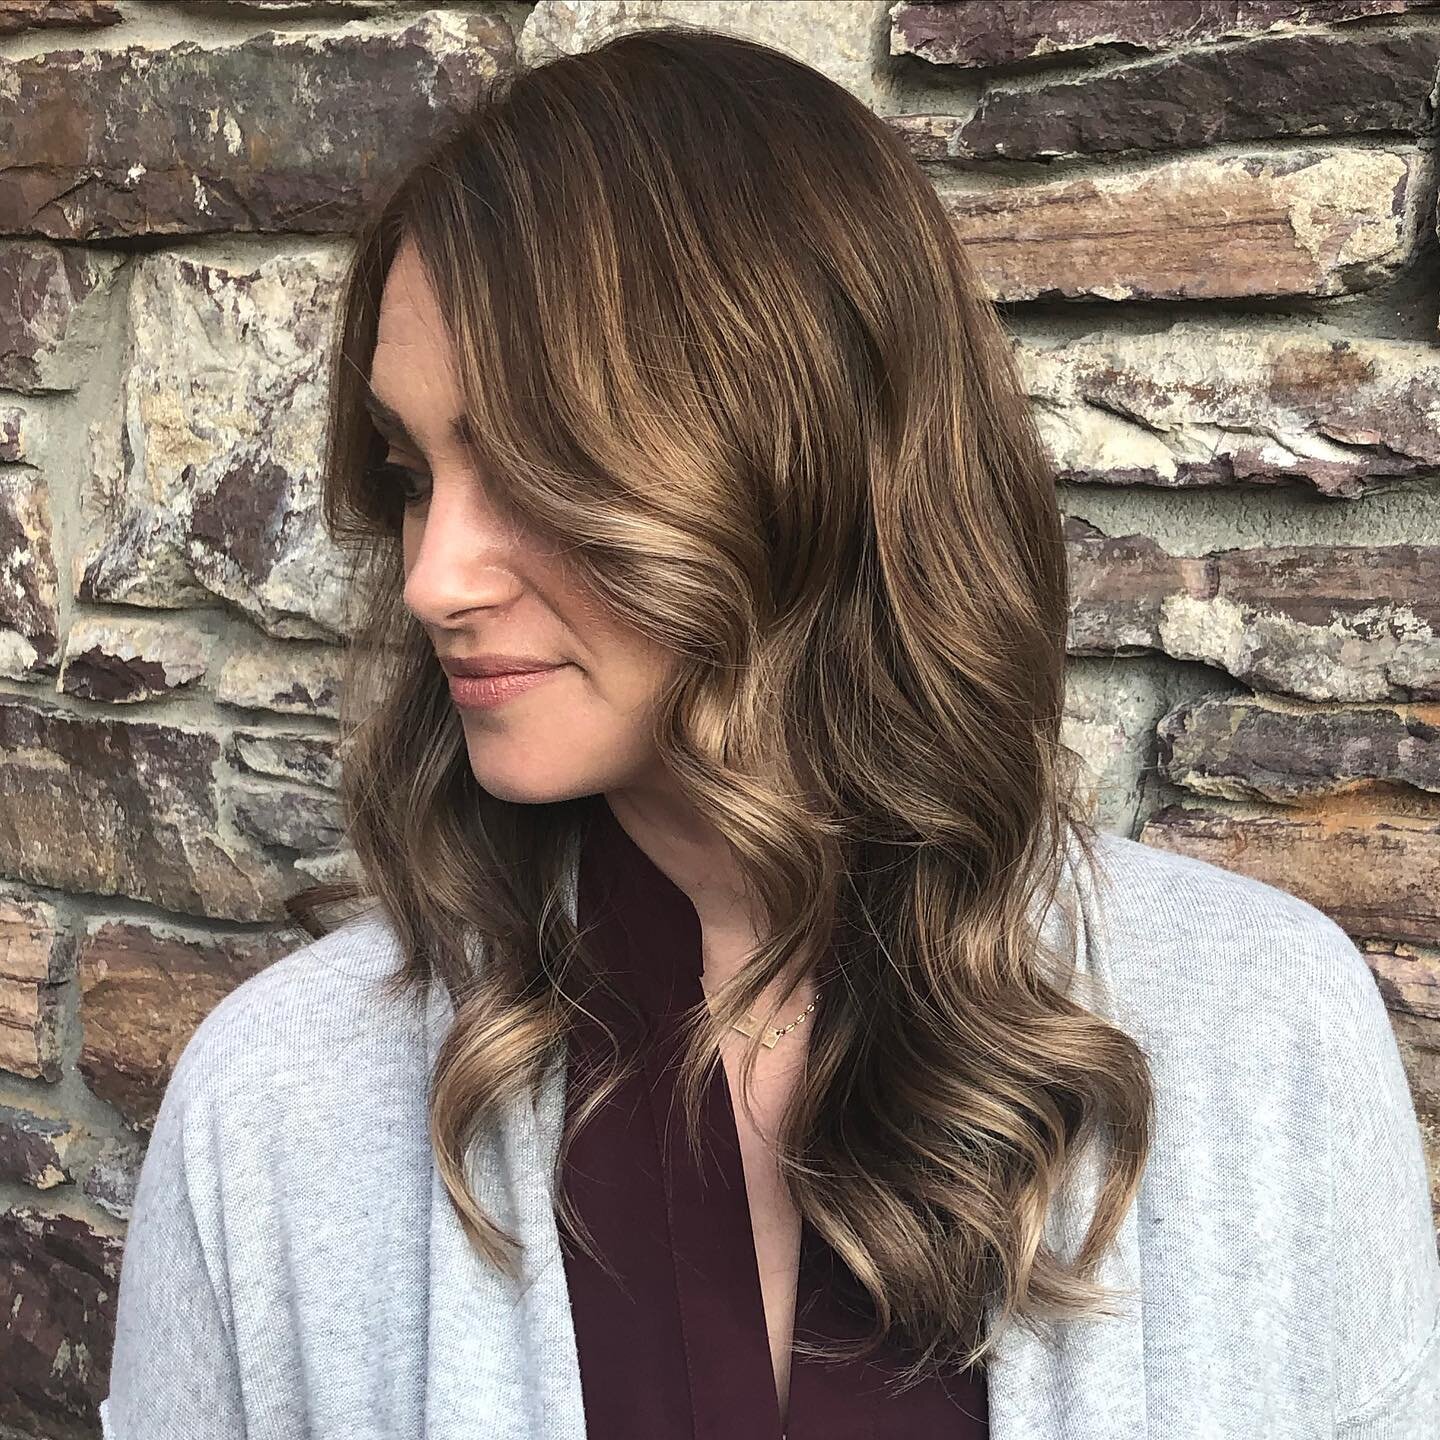 Just a little balayage and foil combo on this lovely human.
.
.
.
.
.
.
.
@sequoiasalonvt #balayagehighlights #balayageandfoils #balayageandbabylights #winterblonde  #winterbrunette #burlingtonvermonthairstylist #vermonthairstylist #vermonthair #btvh